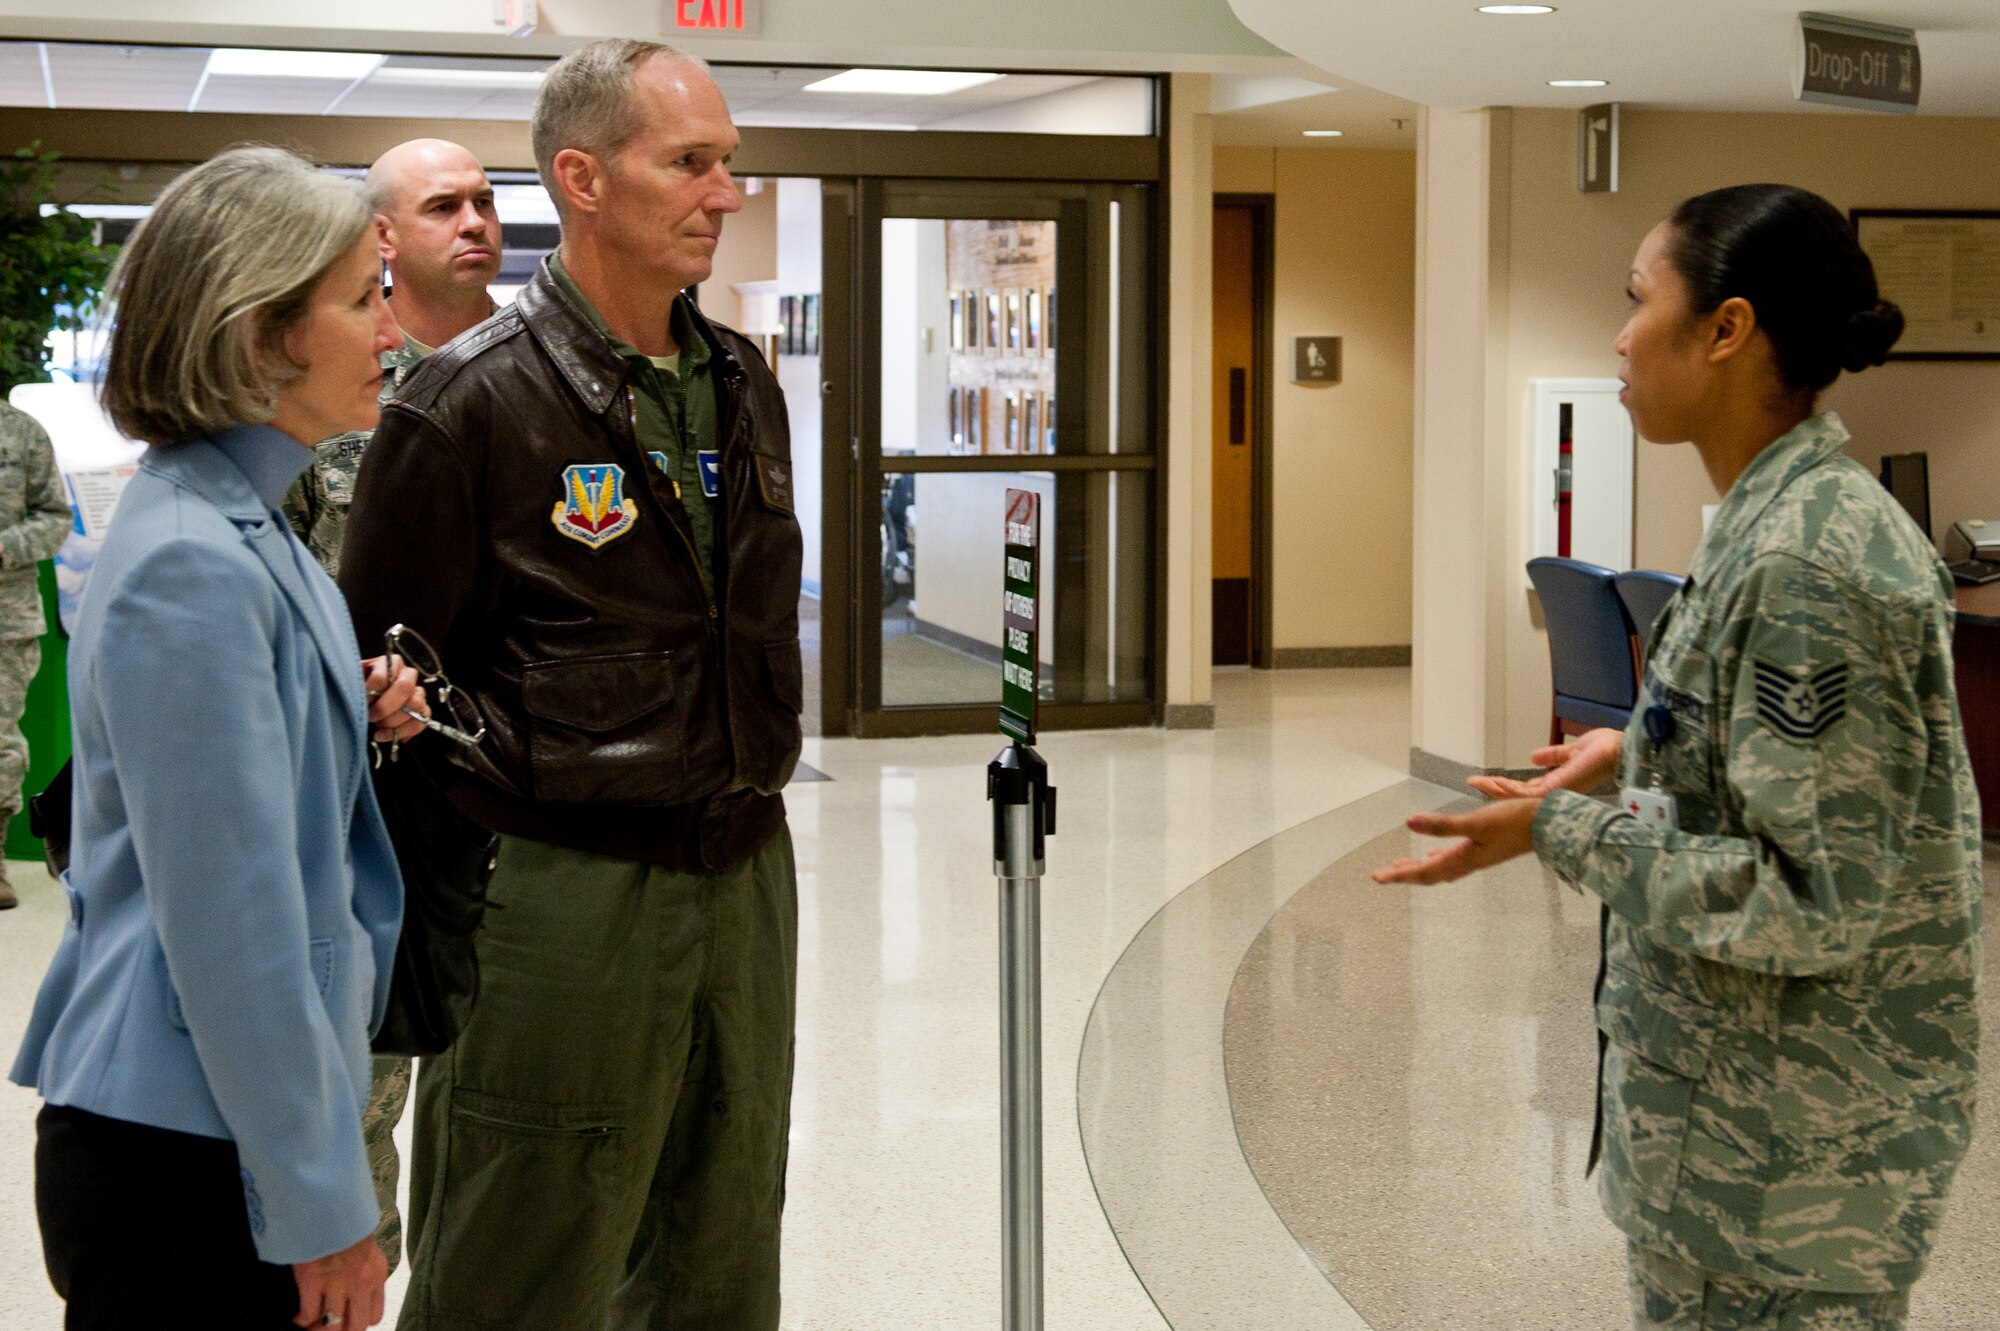 Air Force Tech. Sgt. Sonyea Woolfolk, 28th Medical Support Squadron pharmacy NCO in charge, provides information about pharmacy operations to Gen. Mike Hostage, commander of Air Combat Command, and his wife, Kathy, during their tour of the 28th Medical Group at Ellsworth Air Force Base, S.D., Oct. 10, 2012. Hostage visited Ellsworth to see firsthand the mission being accomplished by the Airmen providing expeditionary combat power. (U.S. Air Force photo by Airmen 1st Class Kate Thornton-Maurer/ Released)